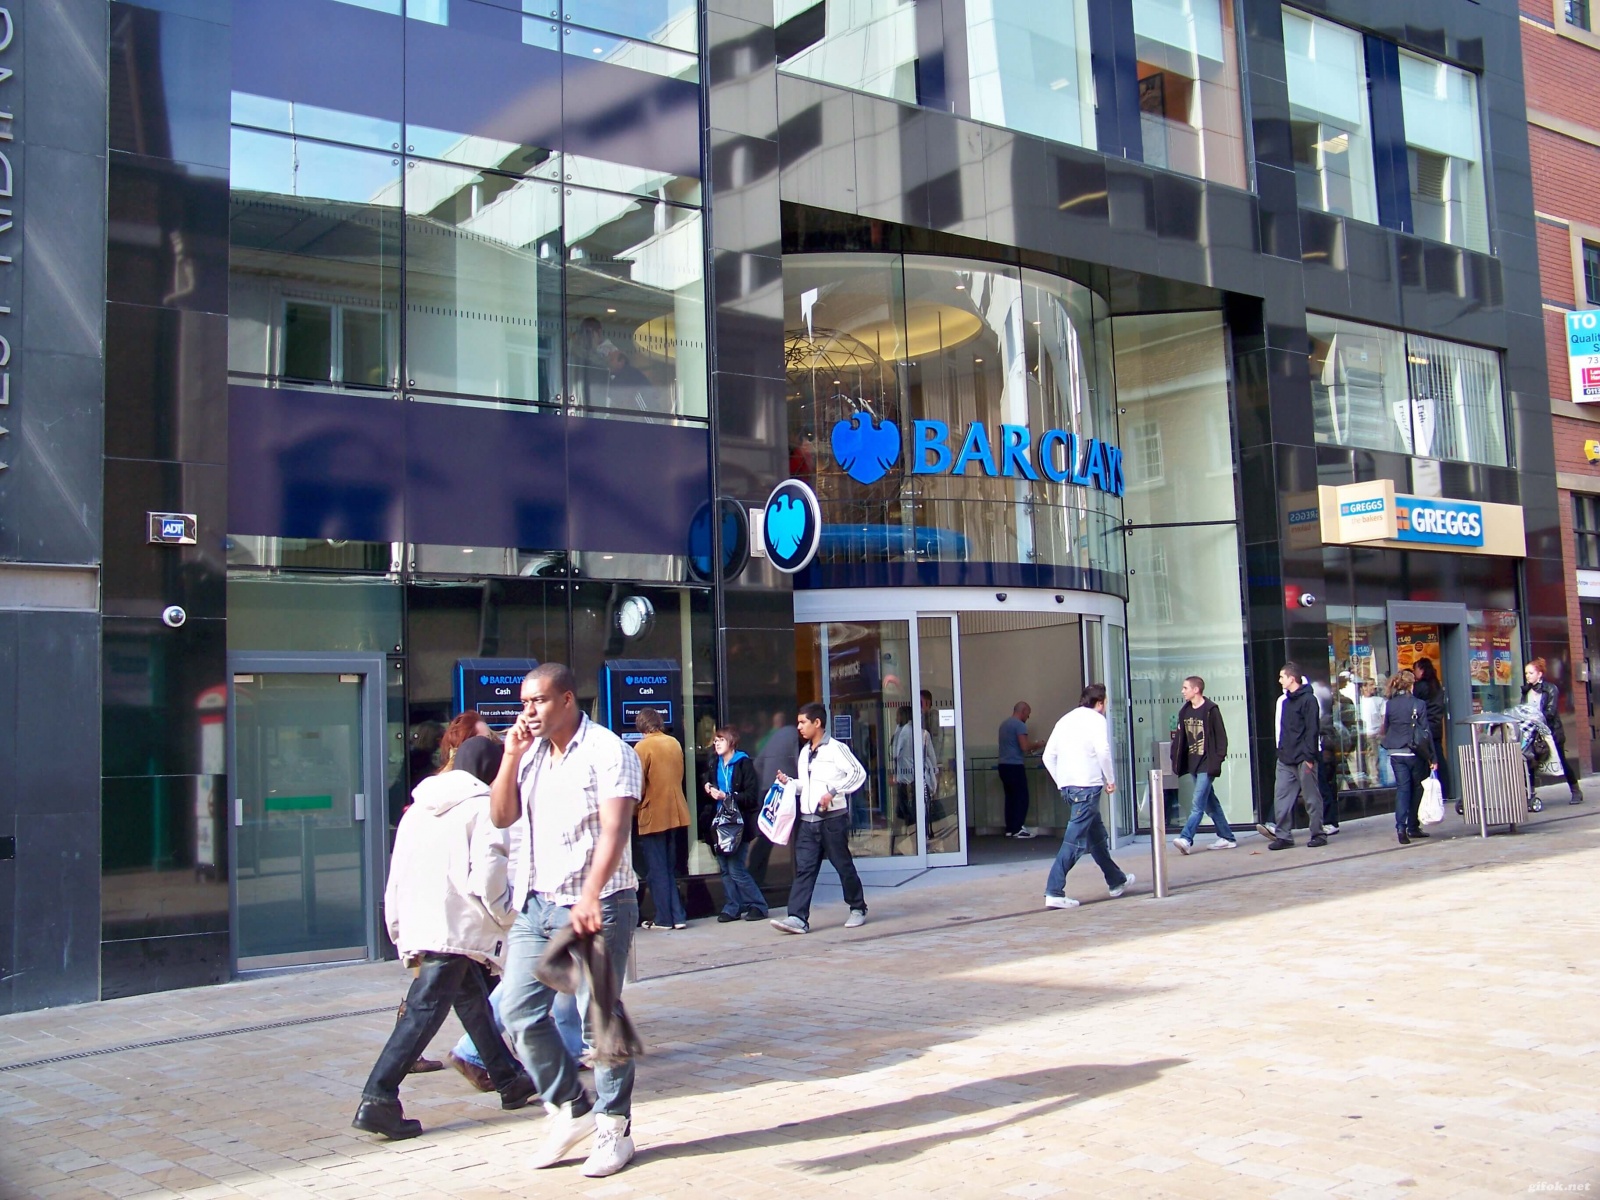 Barclays-becomes-the-first-high-street-bank-to-accept-Bitcoin.jpg